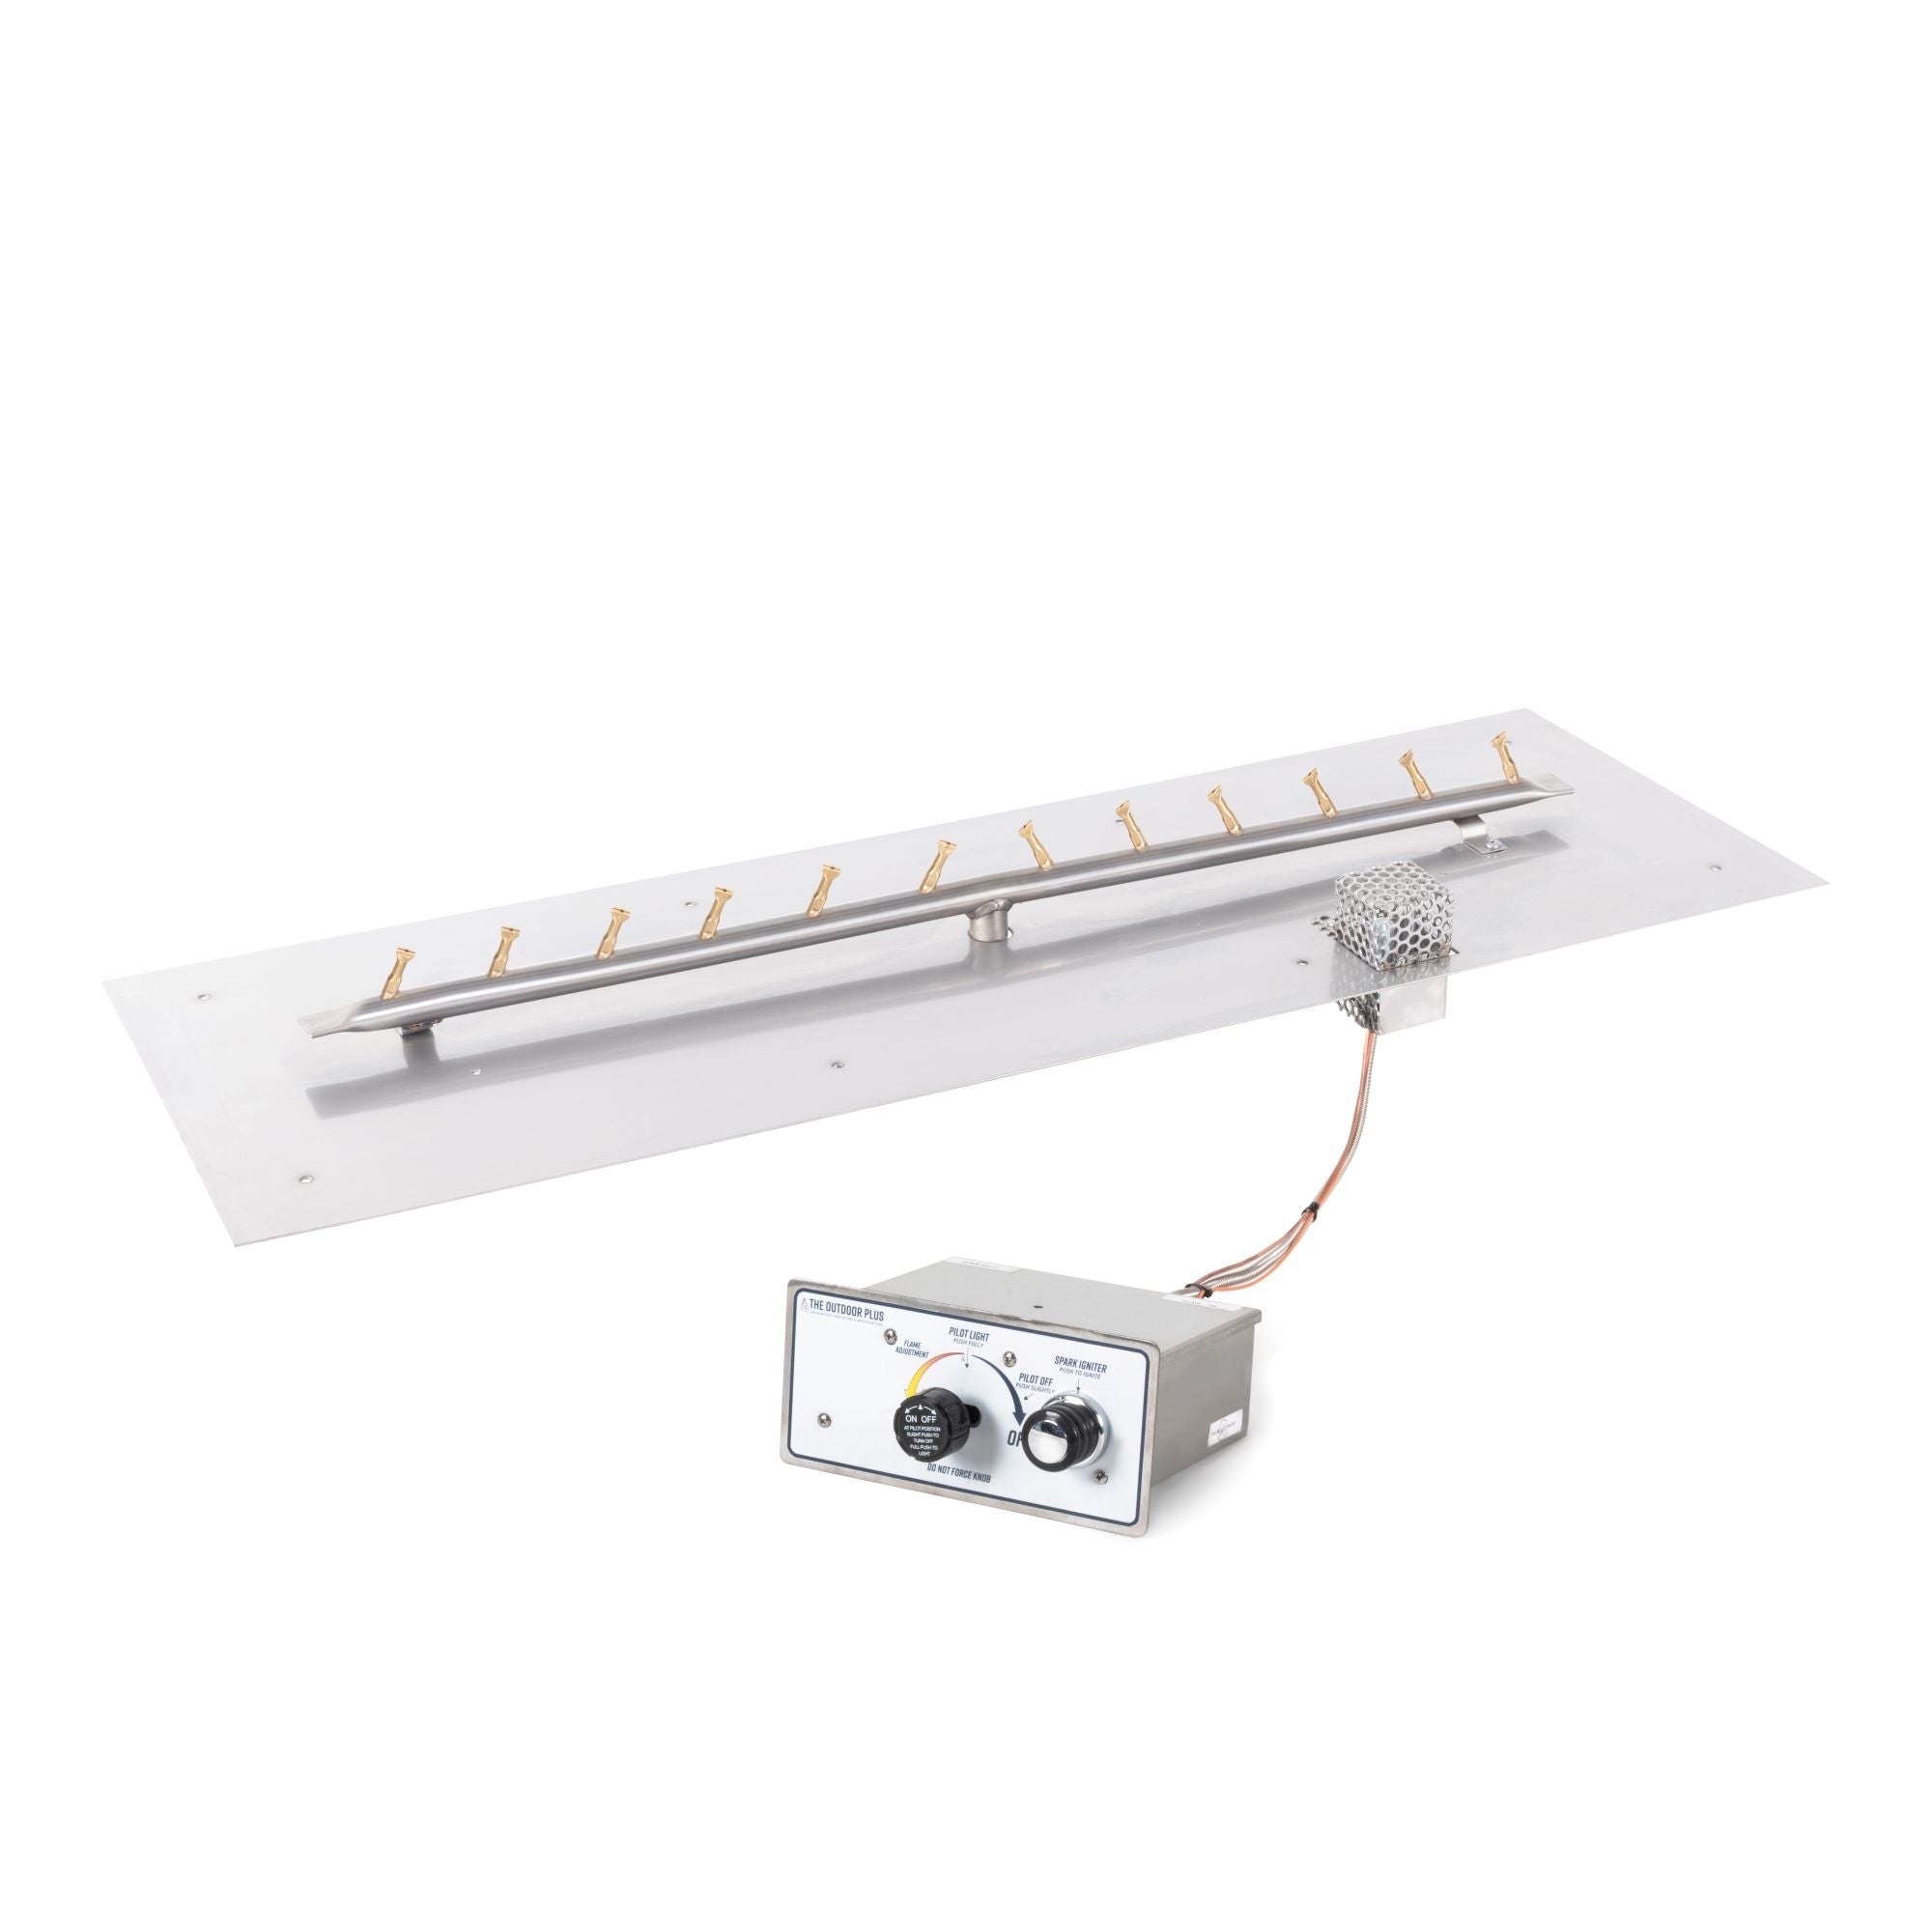 The Outdoor Plus Rectangular Flat Pan with Stainless Steel Linear Triple 'S' Bullet Burner